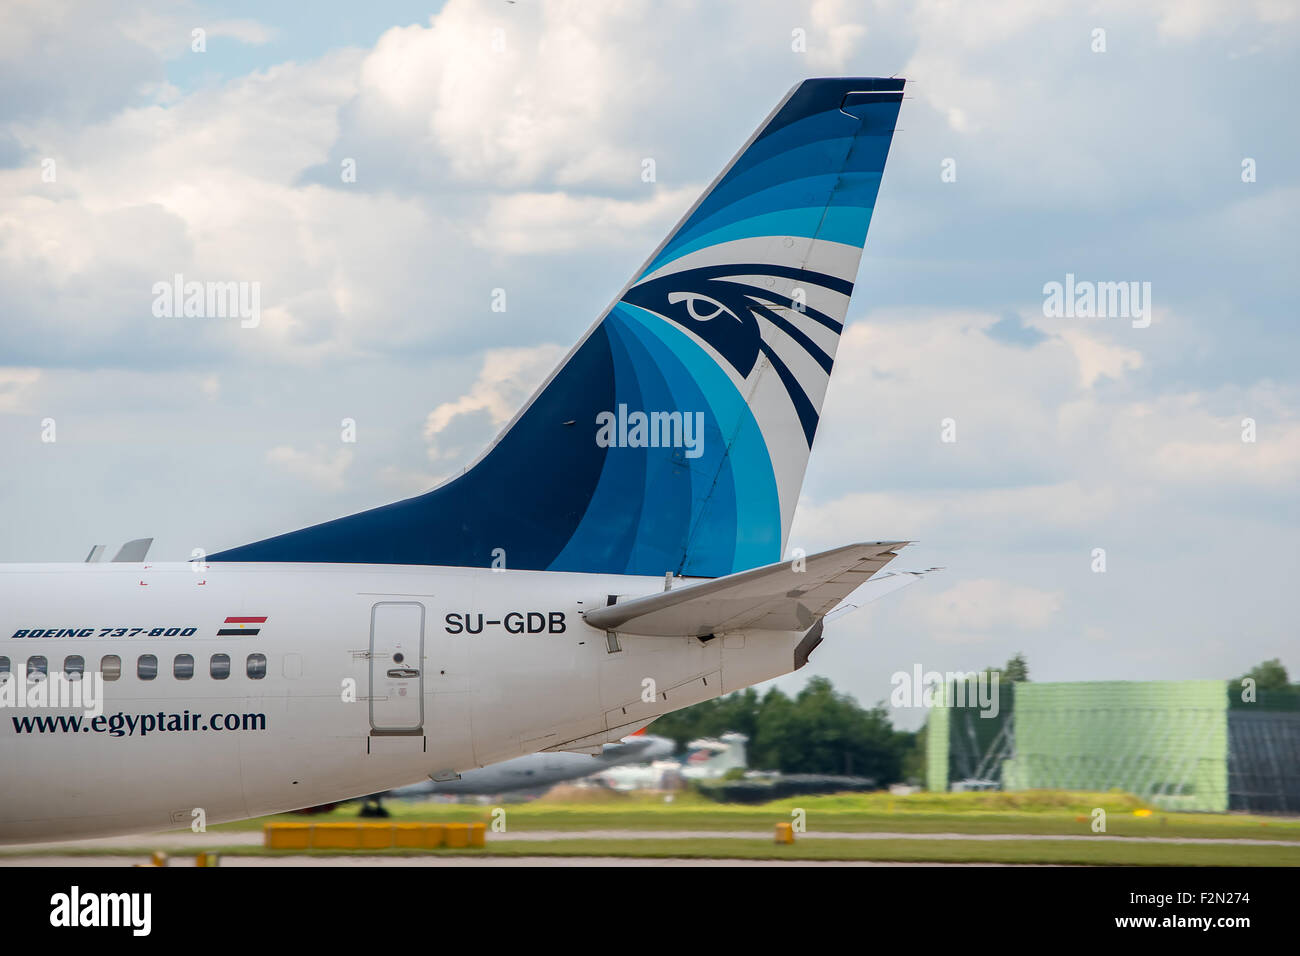 MANCHESTER, UNITED KINGDOM - AUG 07, 2015: EgyptAir Boeing 737 tail livery at Manchester Airport Aug 07 2015. Stock Photo